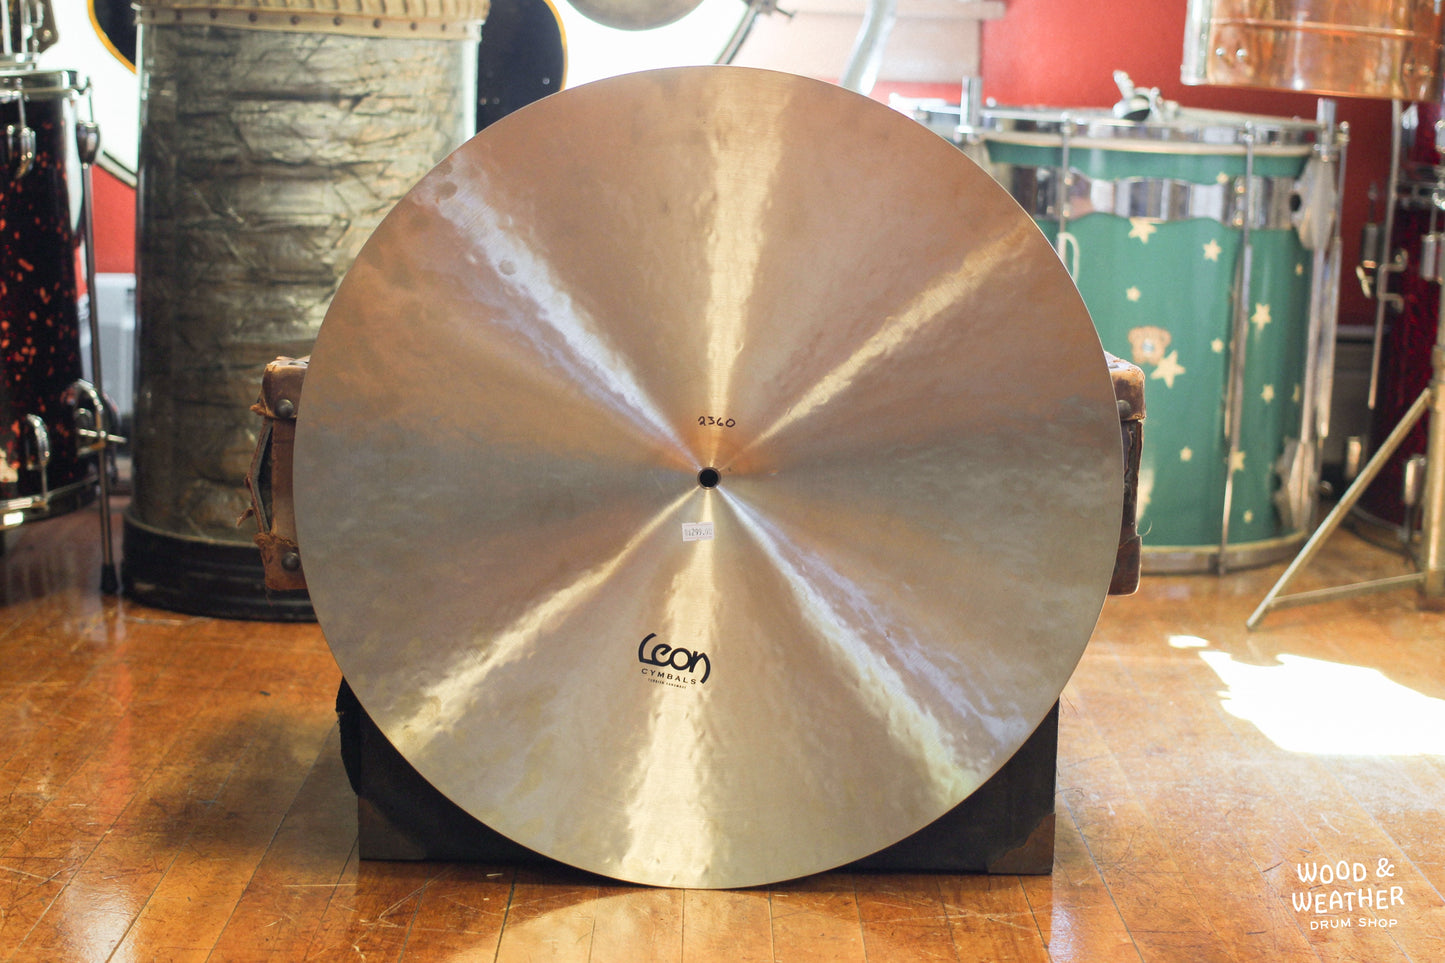 Leon Cymbals 22" Flat Bell Lathed Ride Cymbal 2360g